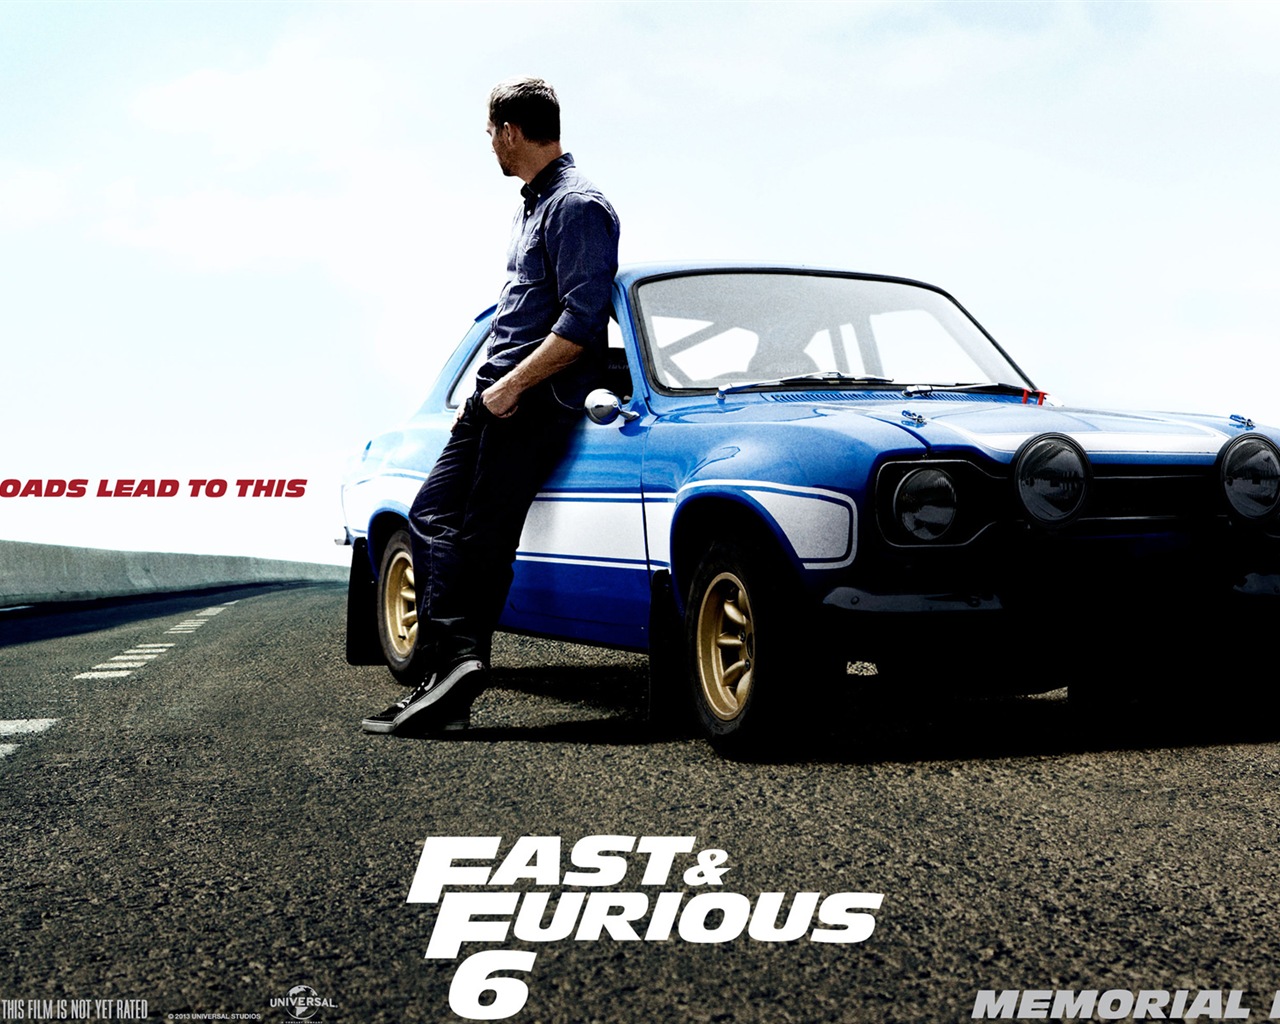 Fast And Furious 6 HD movie wallpapers #10 - 1280x1024